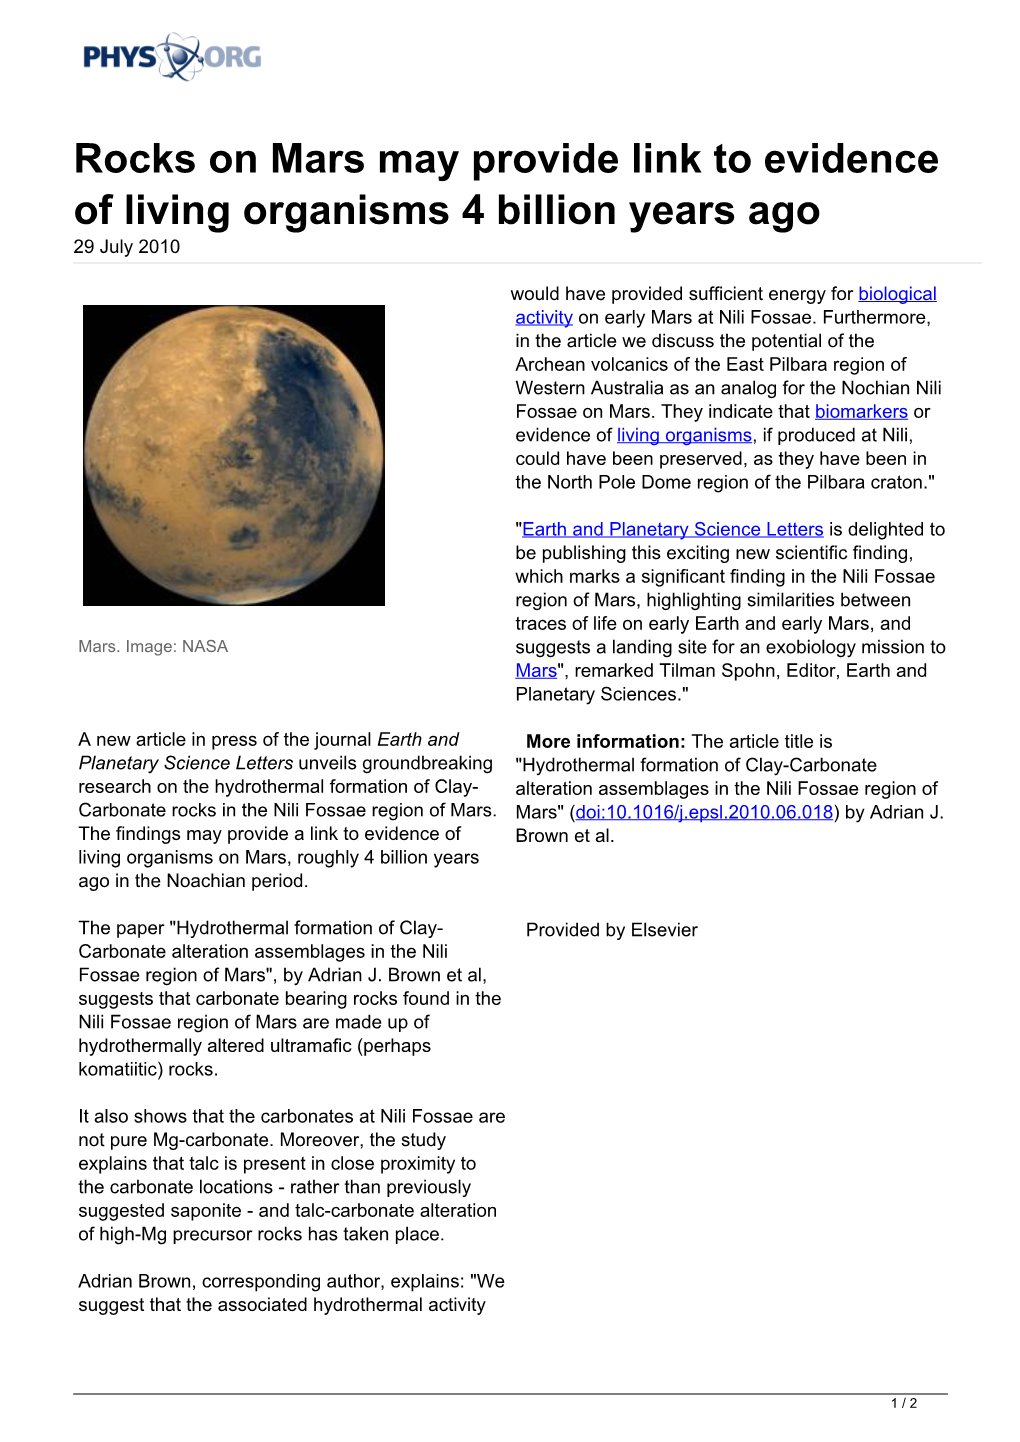 Rocks on Mars May Provide Link to Evidence of Living Organisms 4 Billion Years Ago 29 July 2010